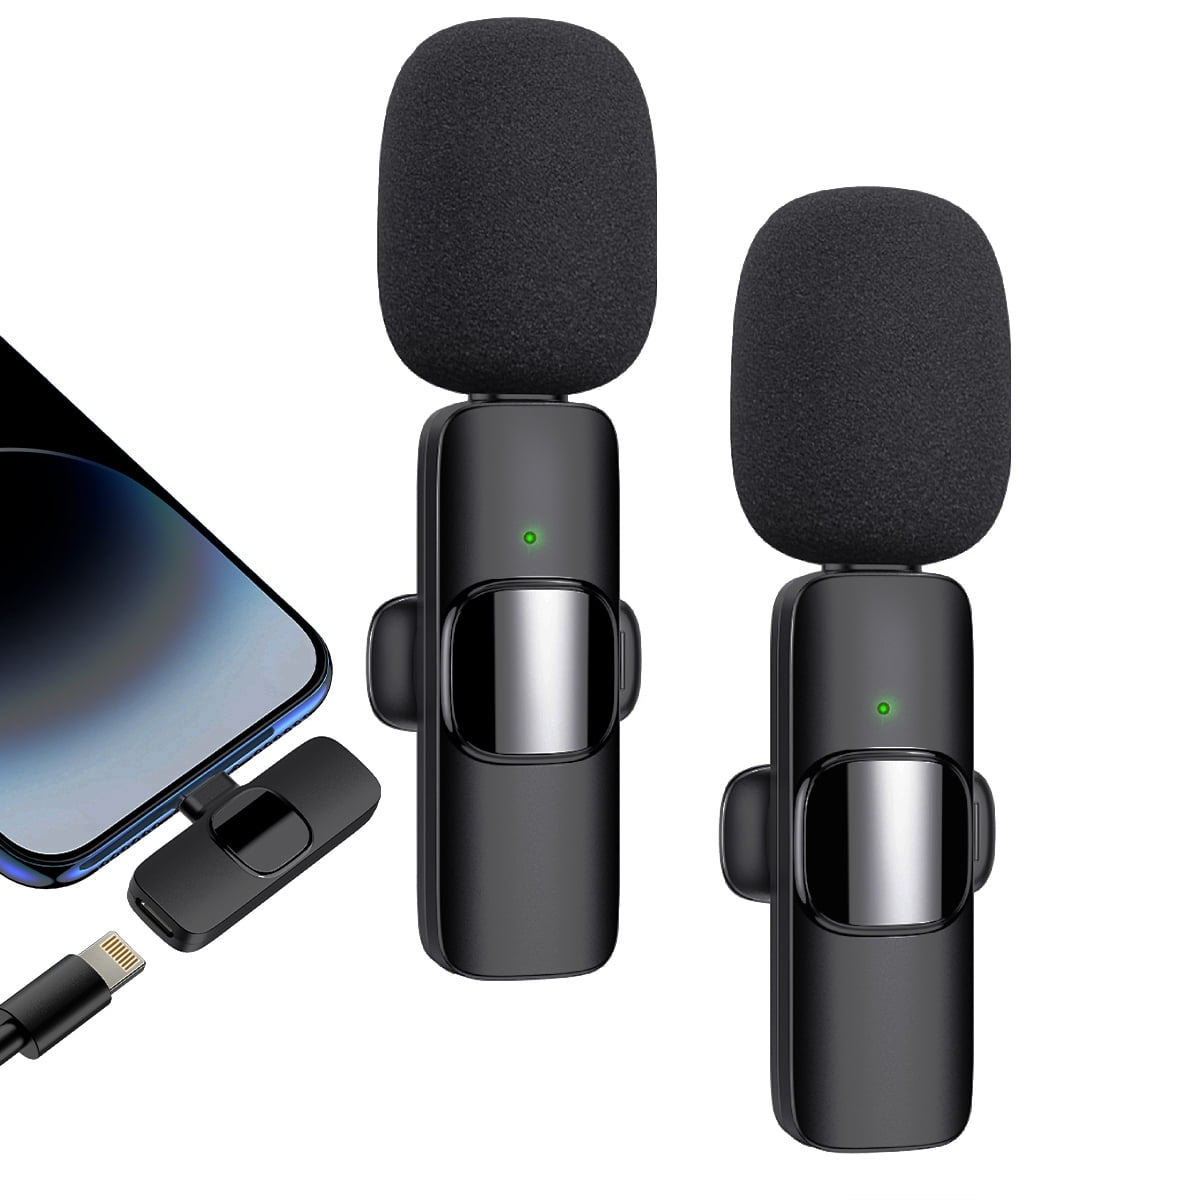 Packs Wireless Lapel Microphone for iPhone iPad, in Professional Wireless  Lavalier Microphone, Noise Reduction Plug-Play Mini Lav Lapel Mic with Clip  for Video Recording Live Stream Vlog YouTube